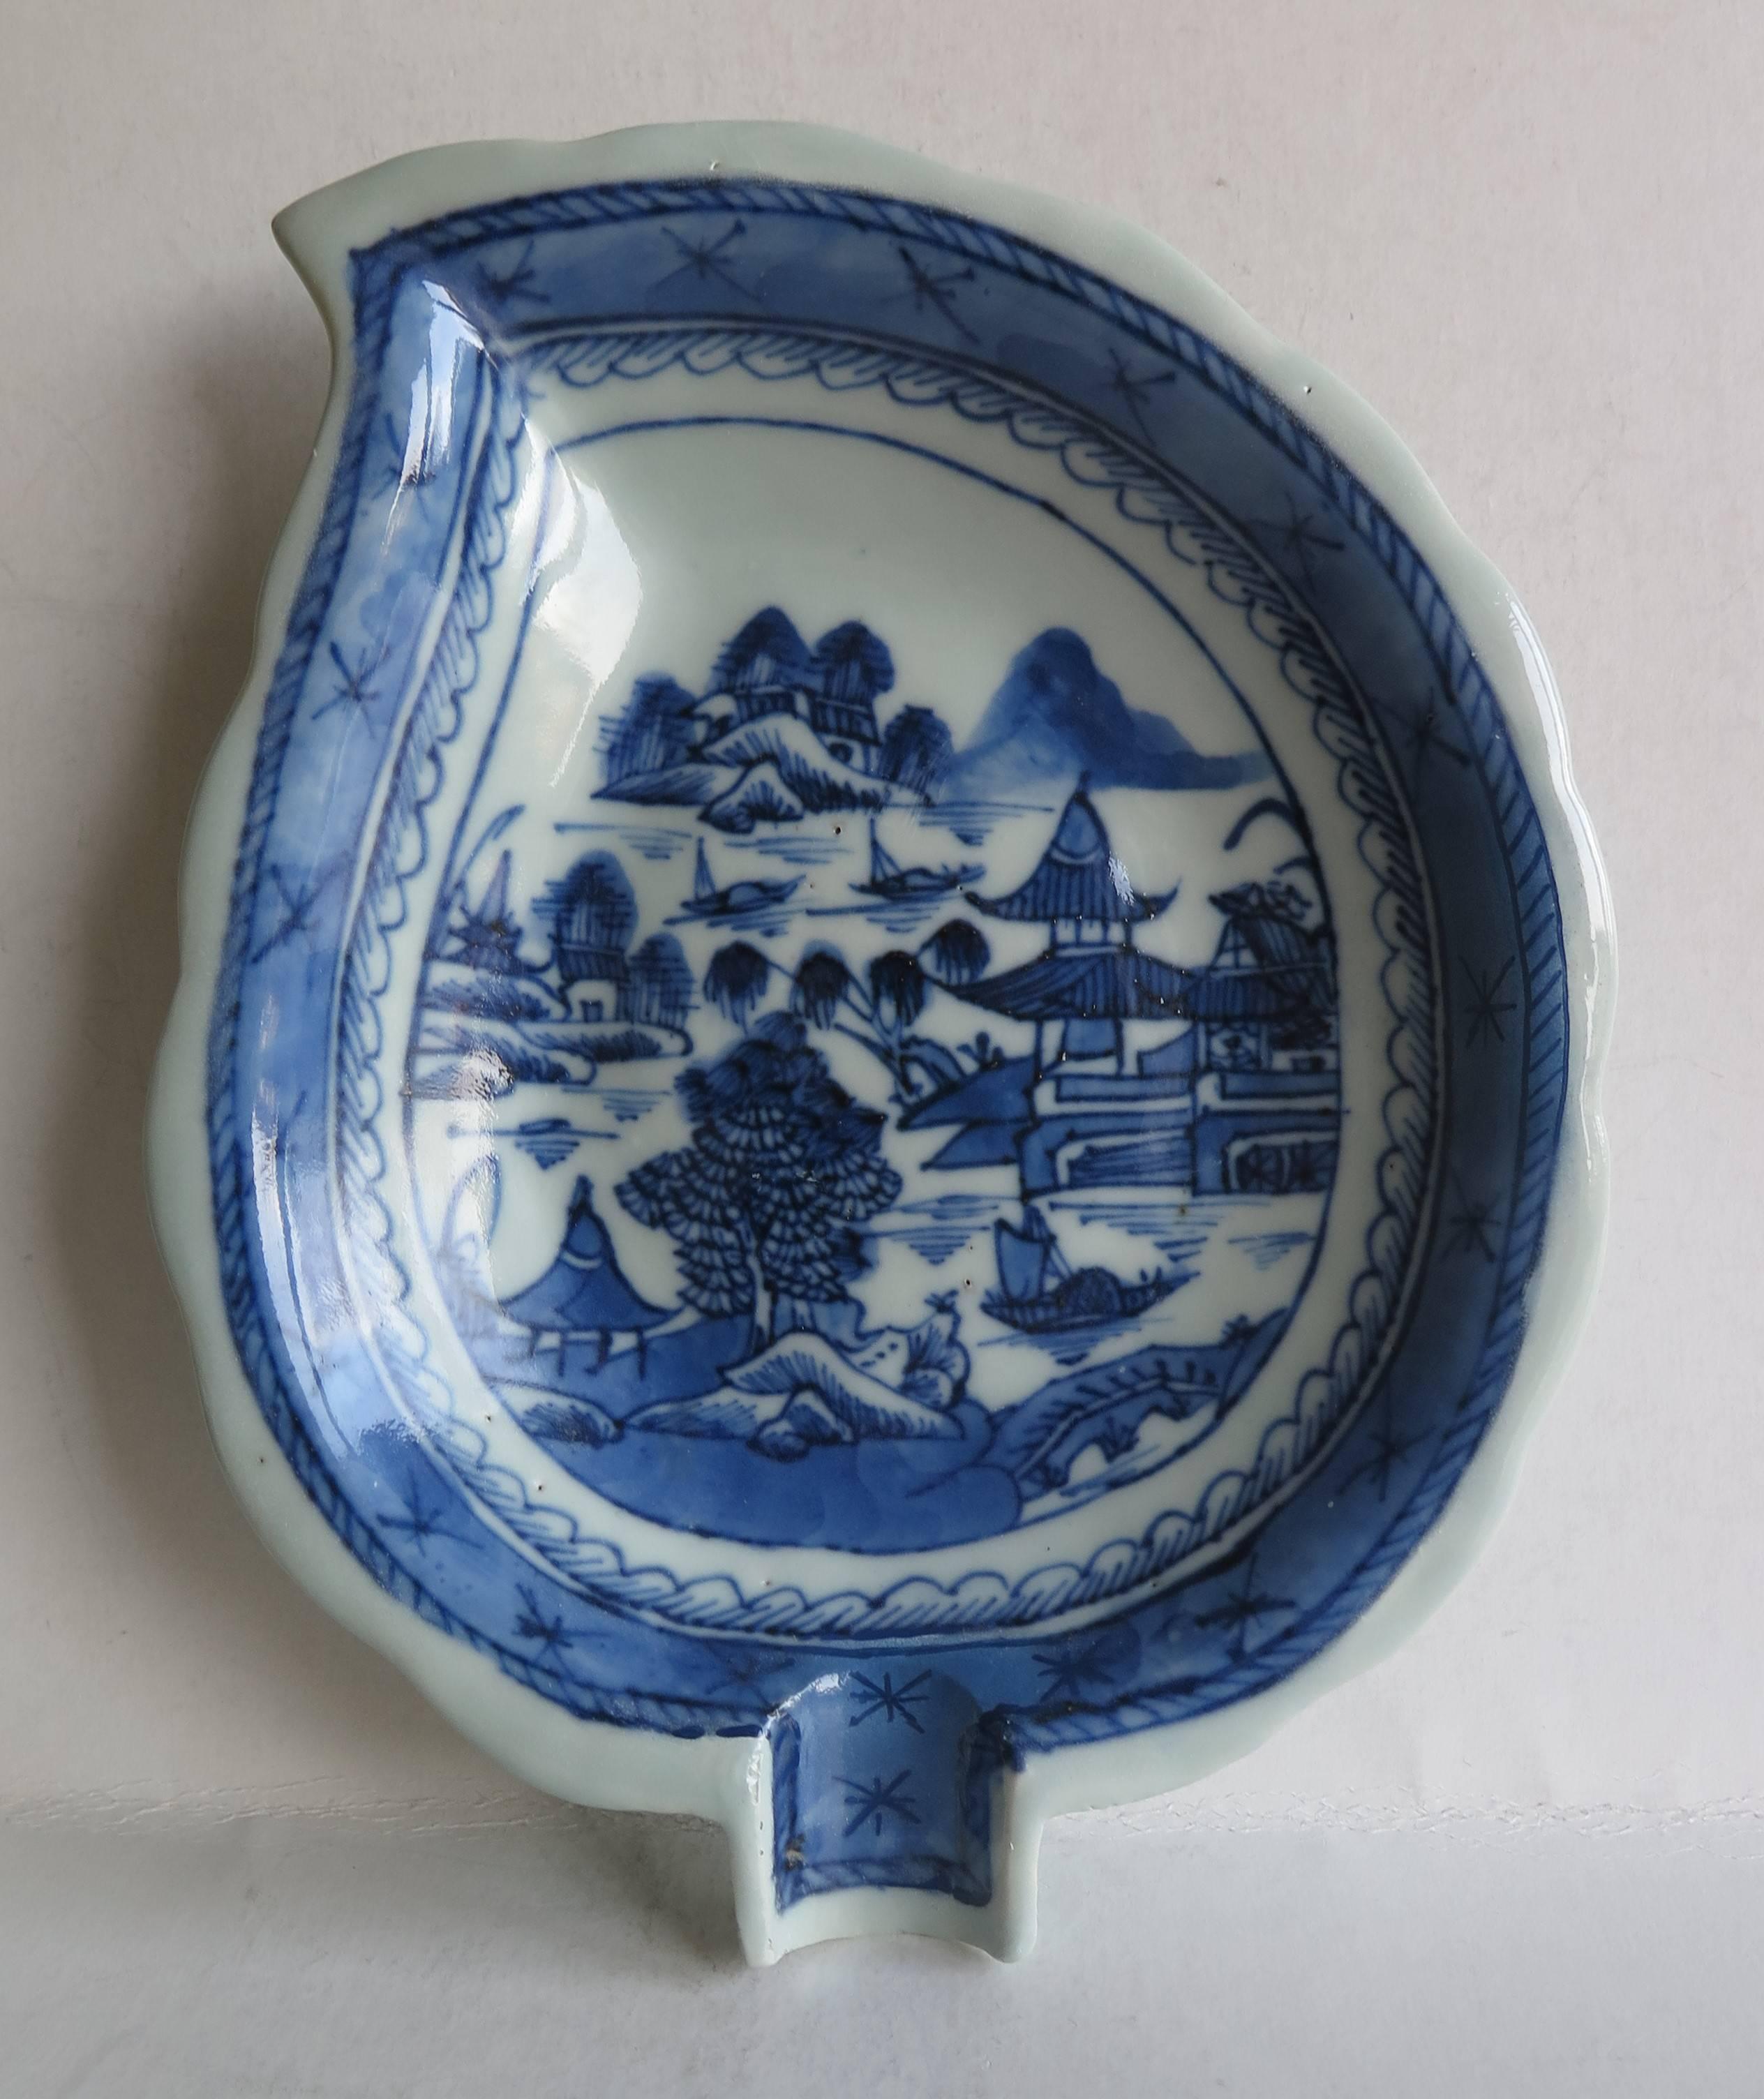 This is a good Chinese porcelain LEAF or pickle DISH made for the Export (Canton)  market.

The dish is leaf shaped with a scalloped edge on a raised foot, decorated in varying shades of blue. The glaze is off white with a very light blue shade